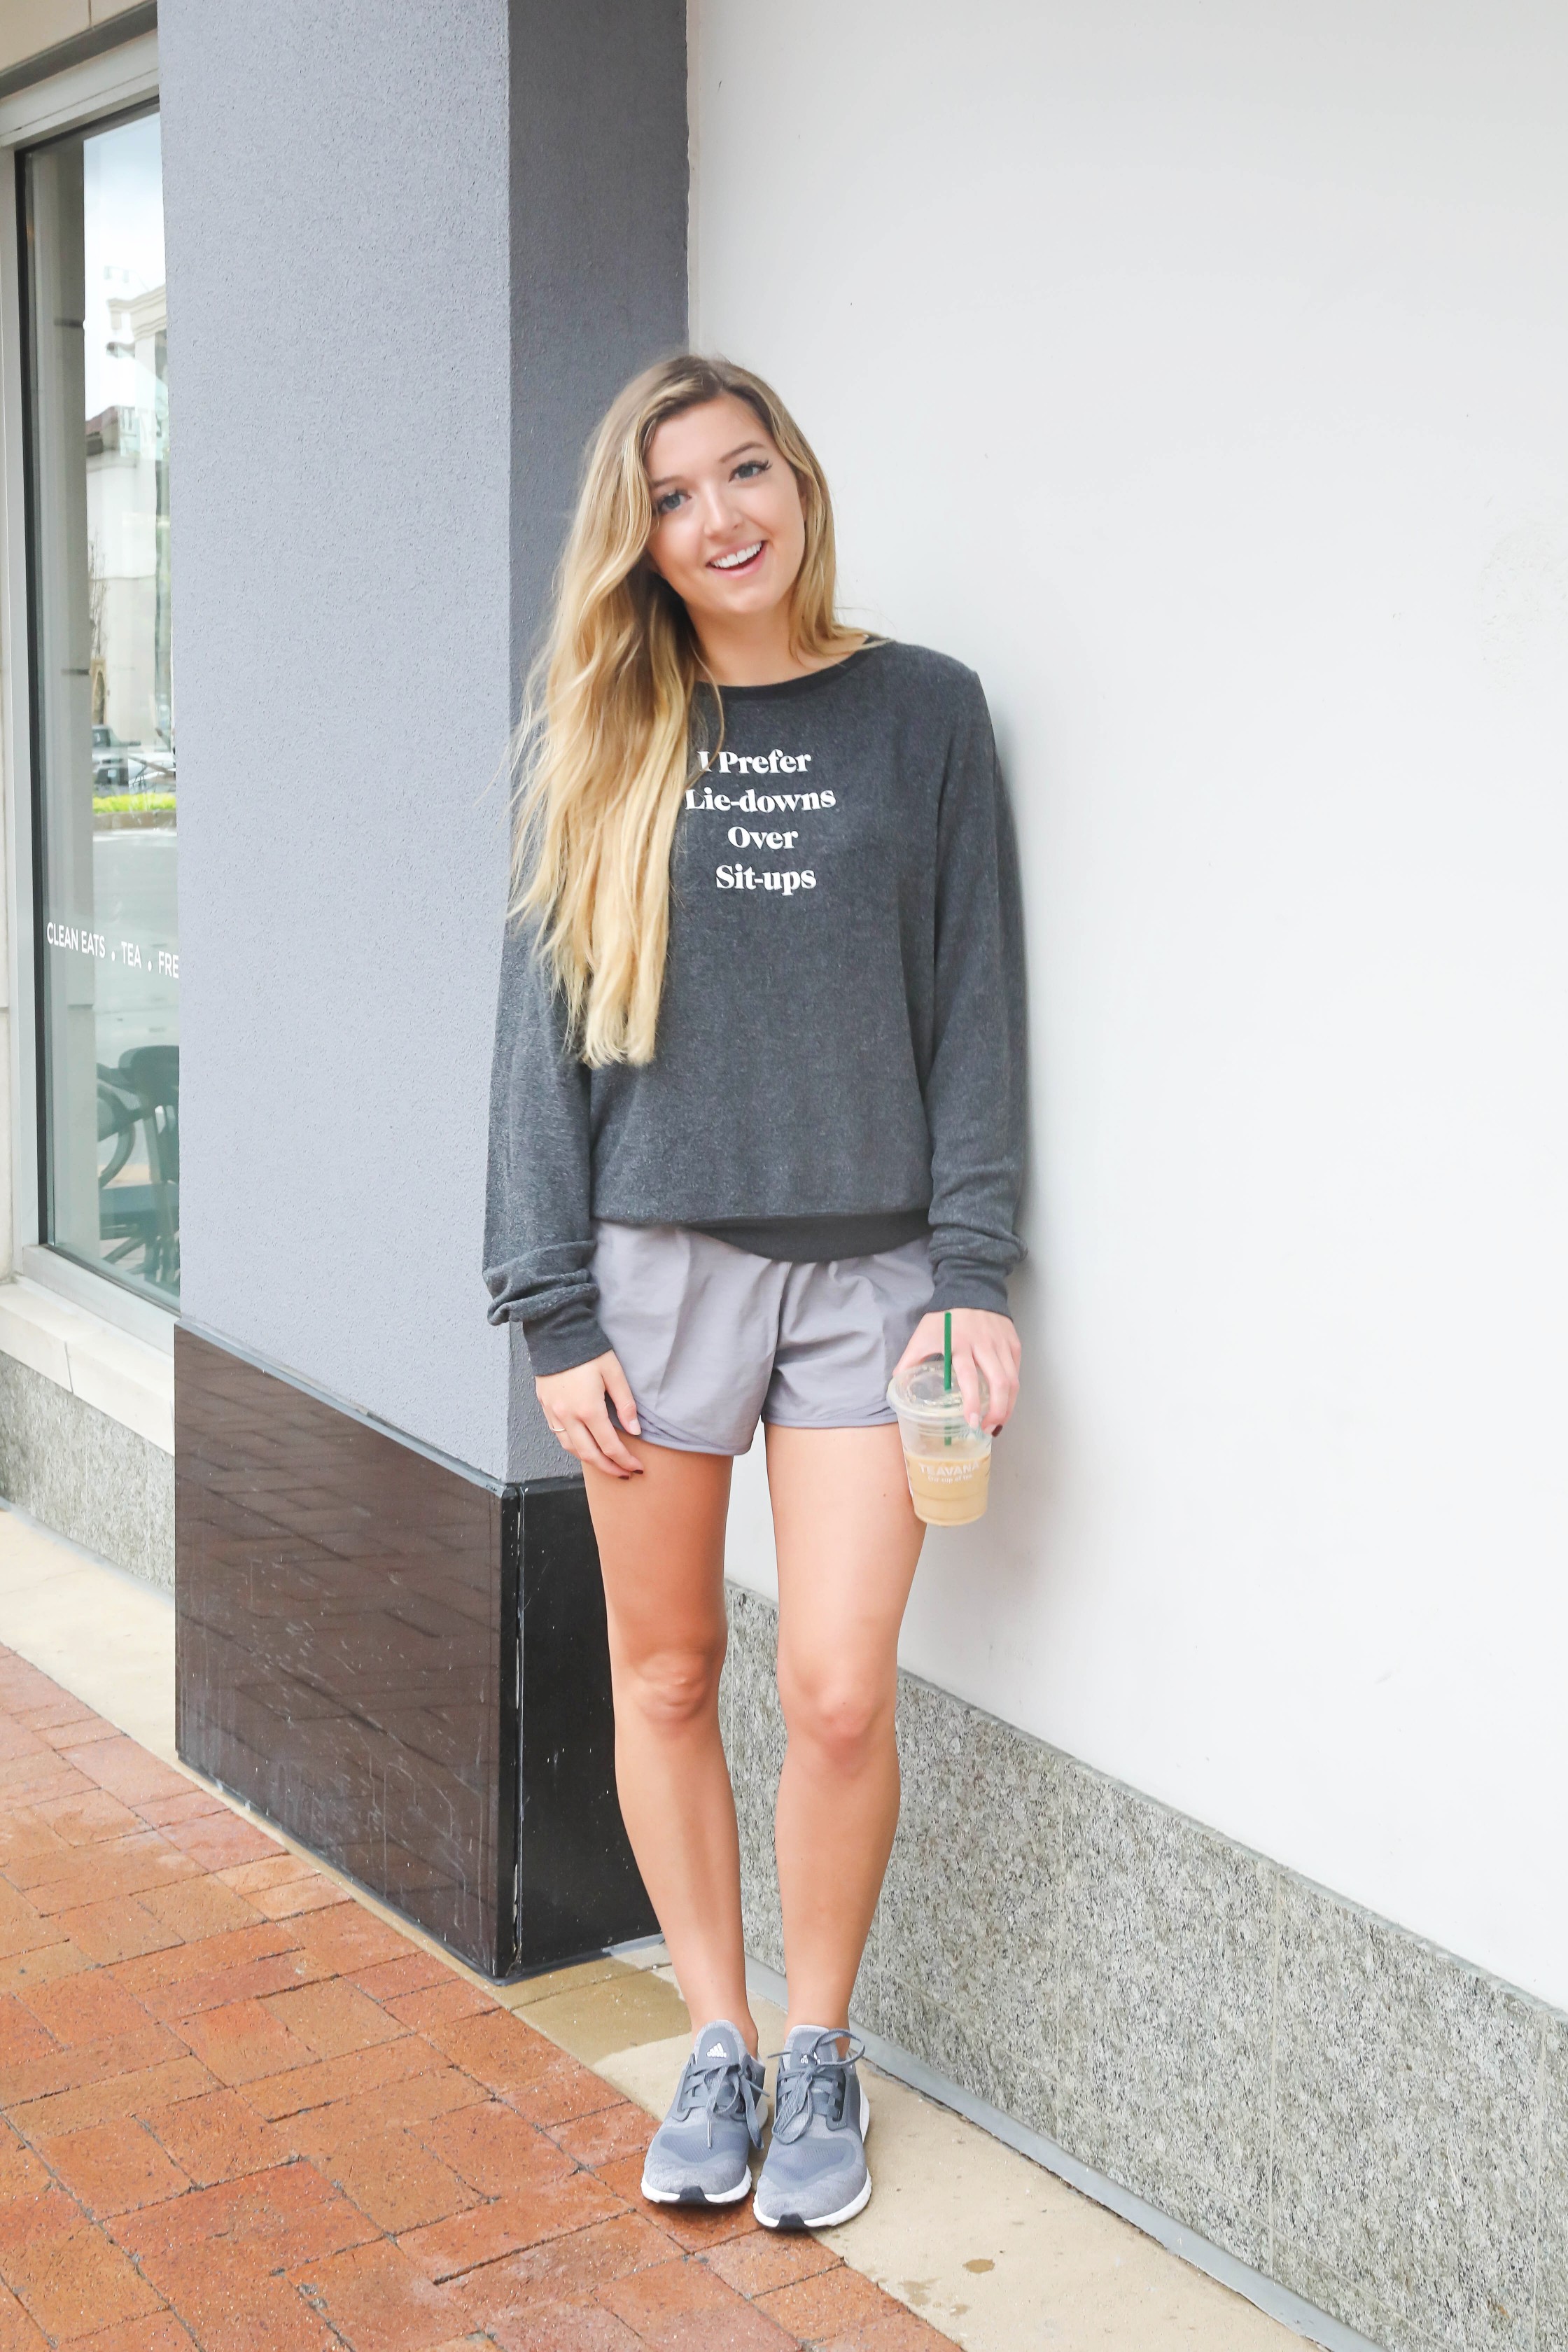 I prefer lie downs over sit ups sweatshirt! Super cute wildfox t-shirt that is super soft! I am a sucker for anything soft and cozy, which is why I am doing a comfy clothing roundup on my fashion blog! Details on daily dose of charm by lauren lindmark